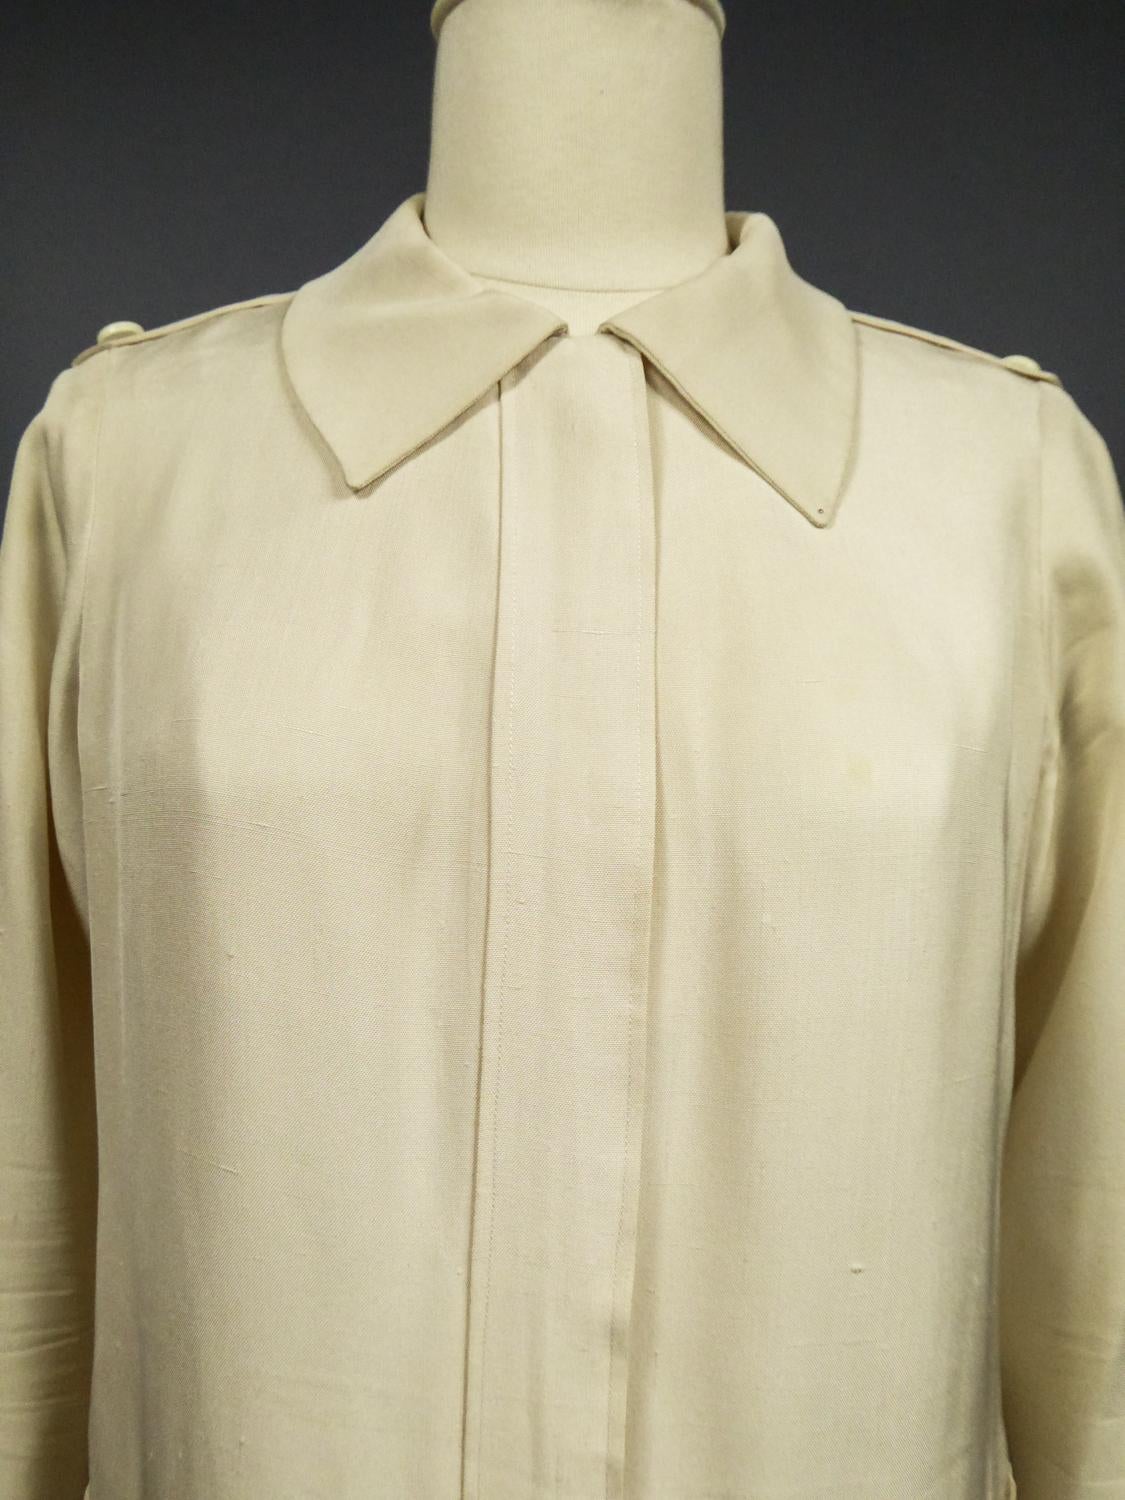 An Yves Saint Laurent Cocktail Dress Numbered 15193 - 1965 Collection 1